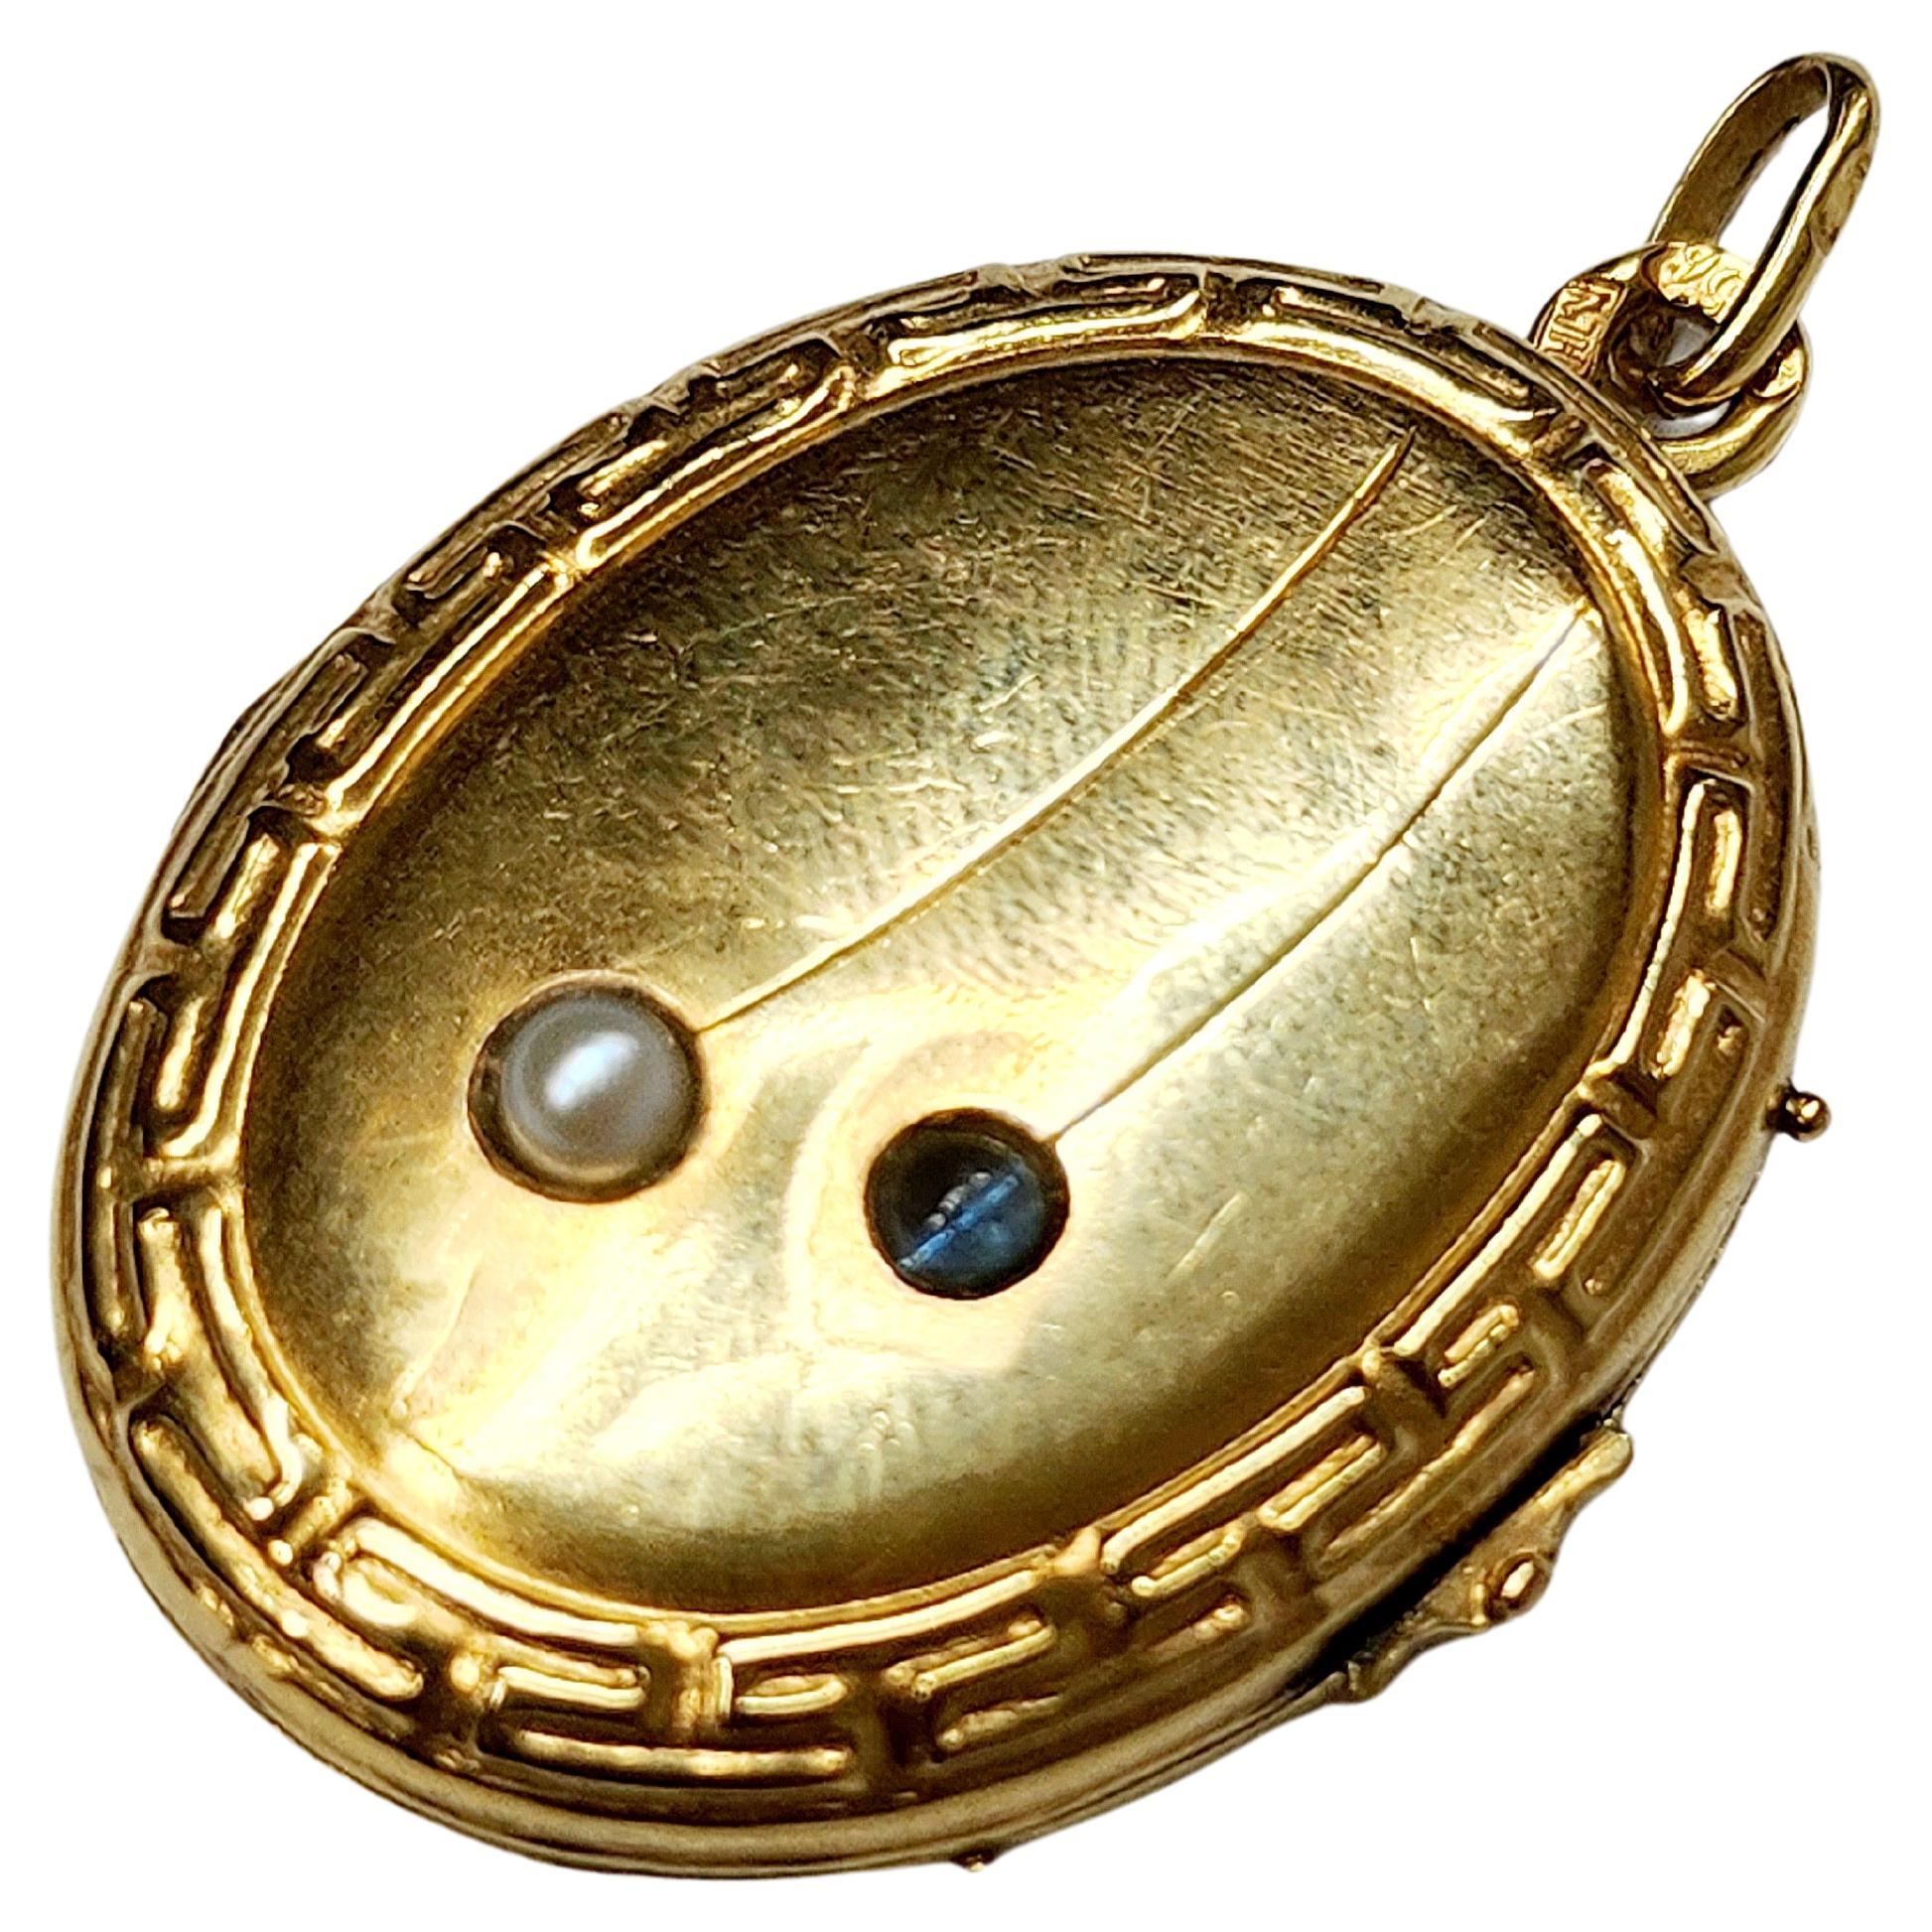 Antique 14k gold russian locket pendant centered with 1 natural blue sapphire stone and white pearl with total gold weight of 5 grams and 4cm lenght in detailed workmanship pendant was made in odessa durung the imperial russian era 1907.c hall